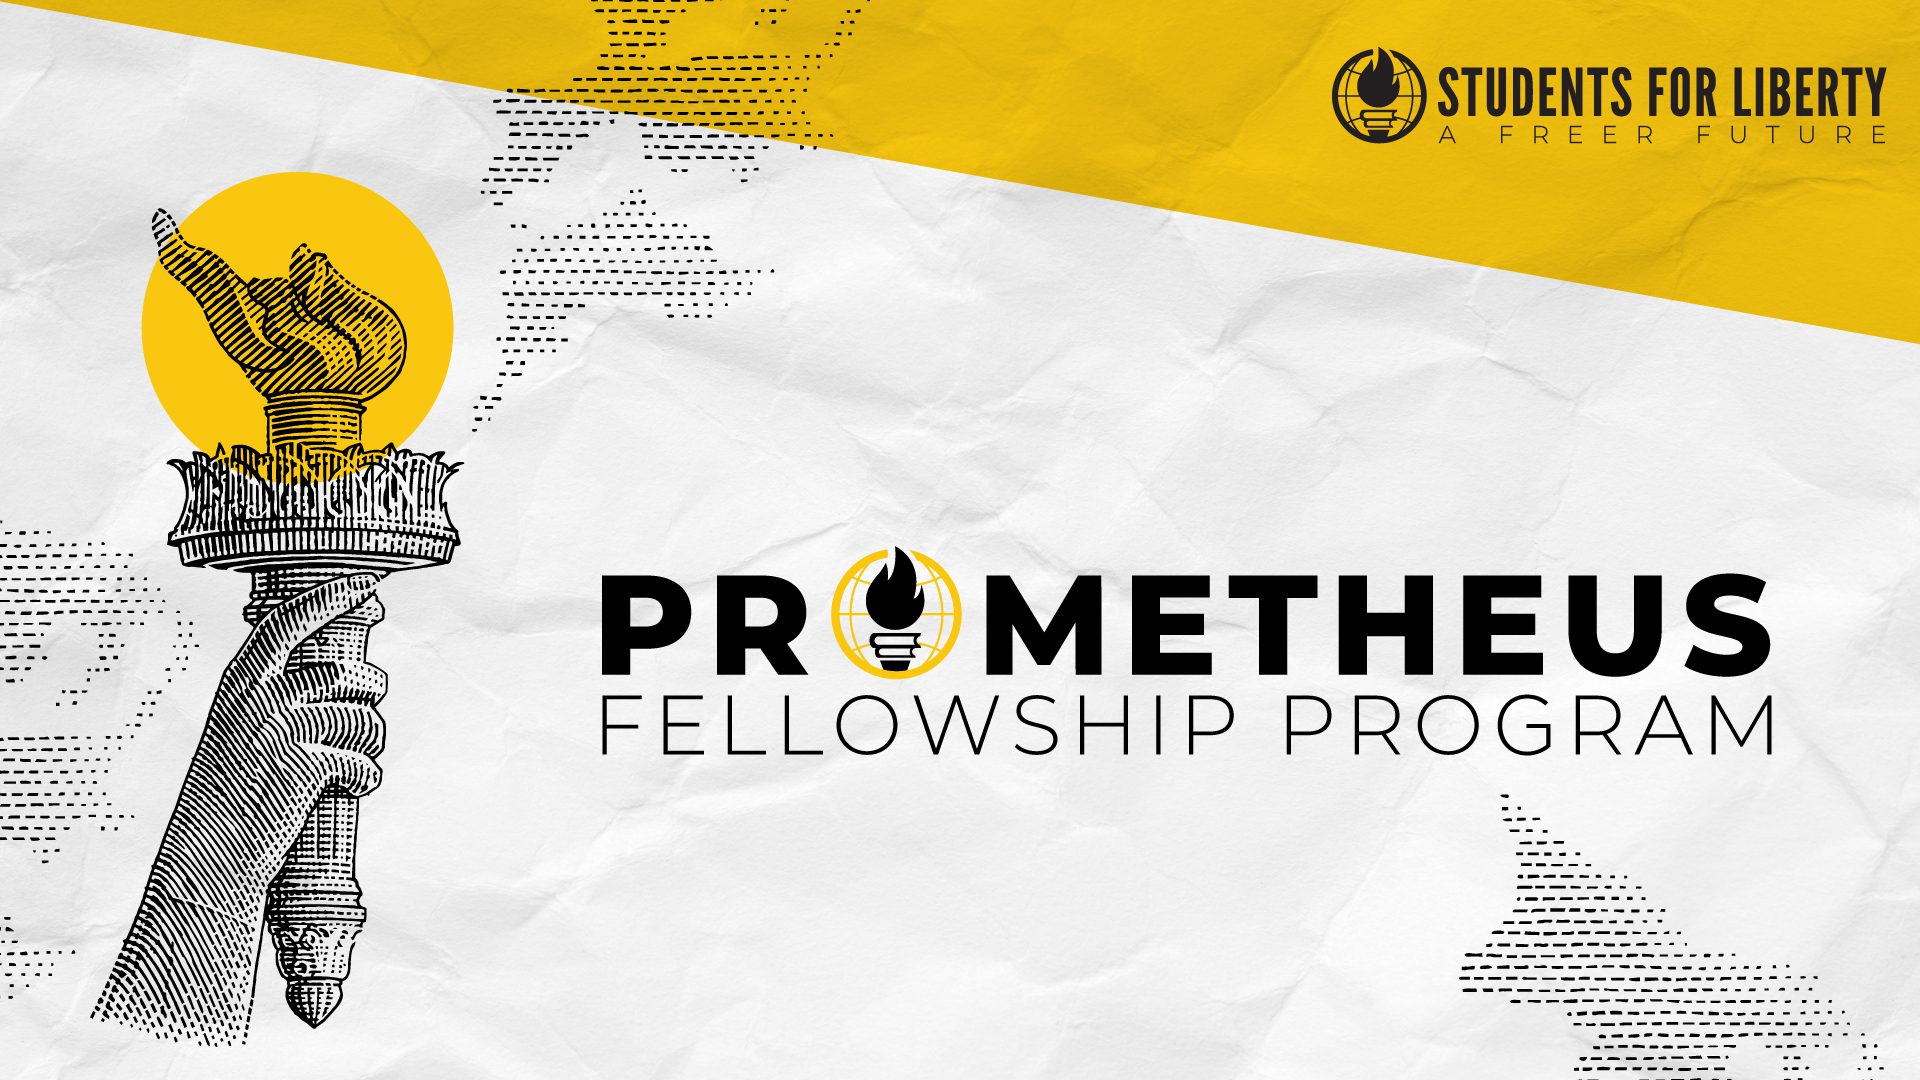 Students For Liberty, with funding from Prometheus Foundation, launches fellowship to equip students with the best education and mentorship to launch their careers